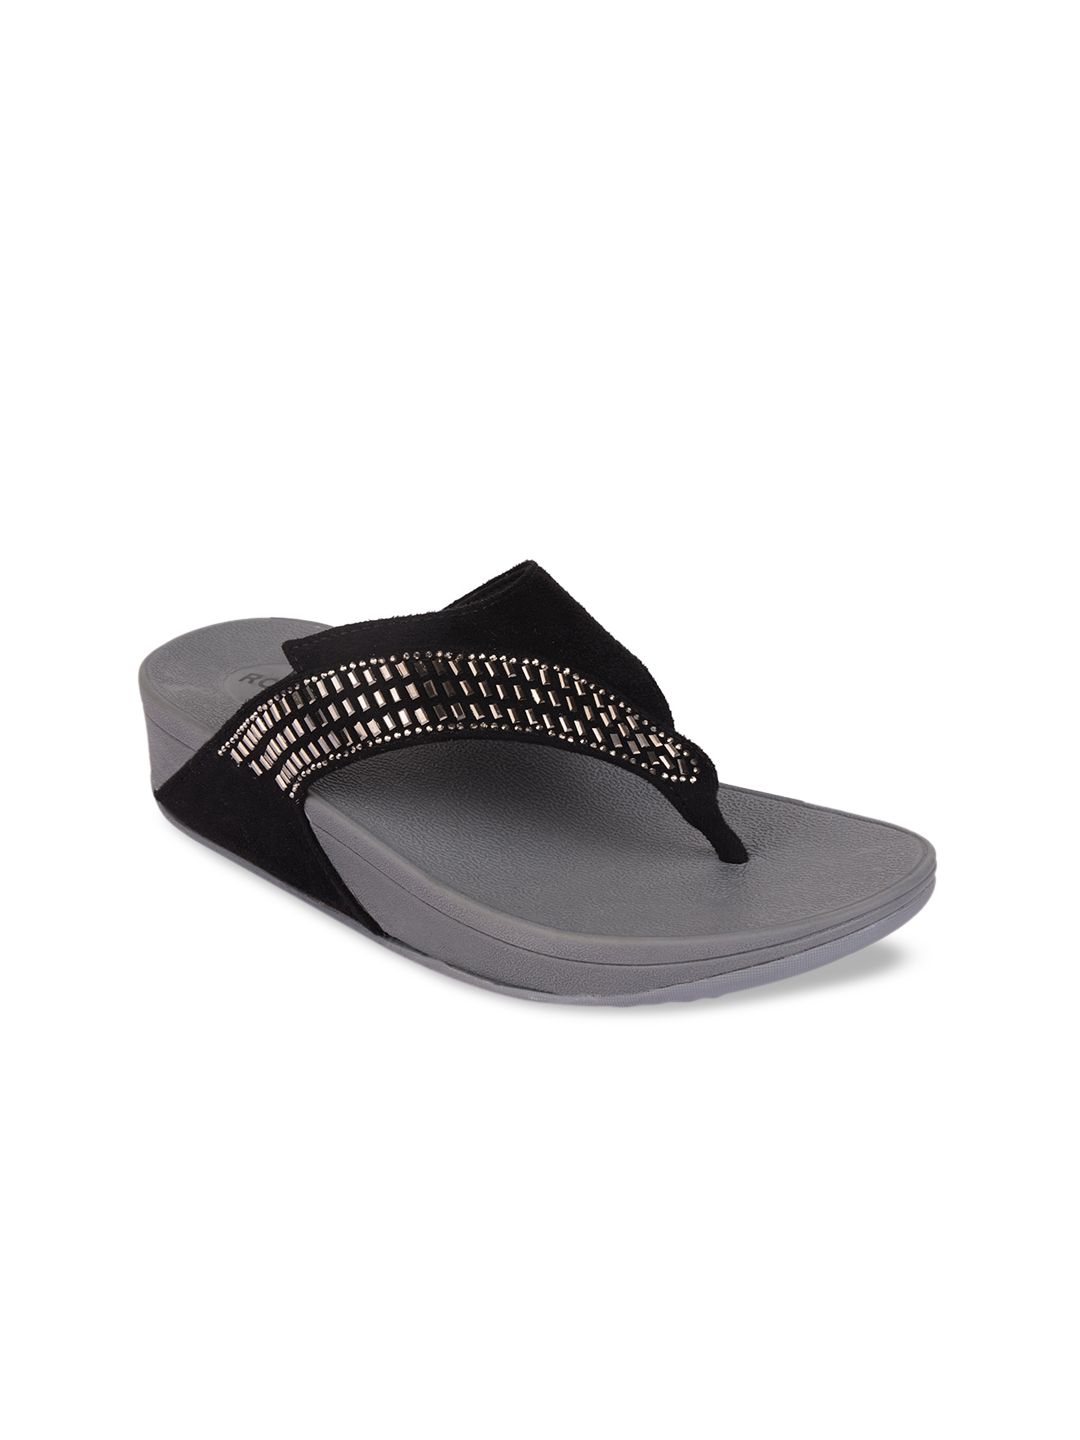 Rocia Women Black Embellished T-Strap Flats Price in India